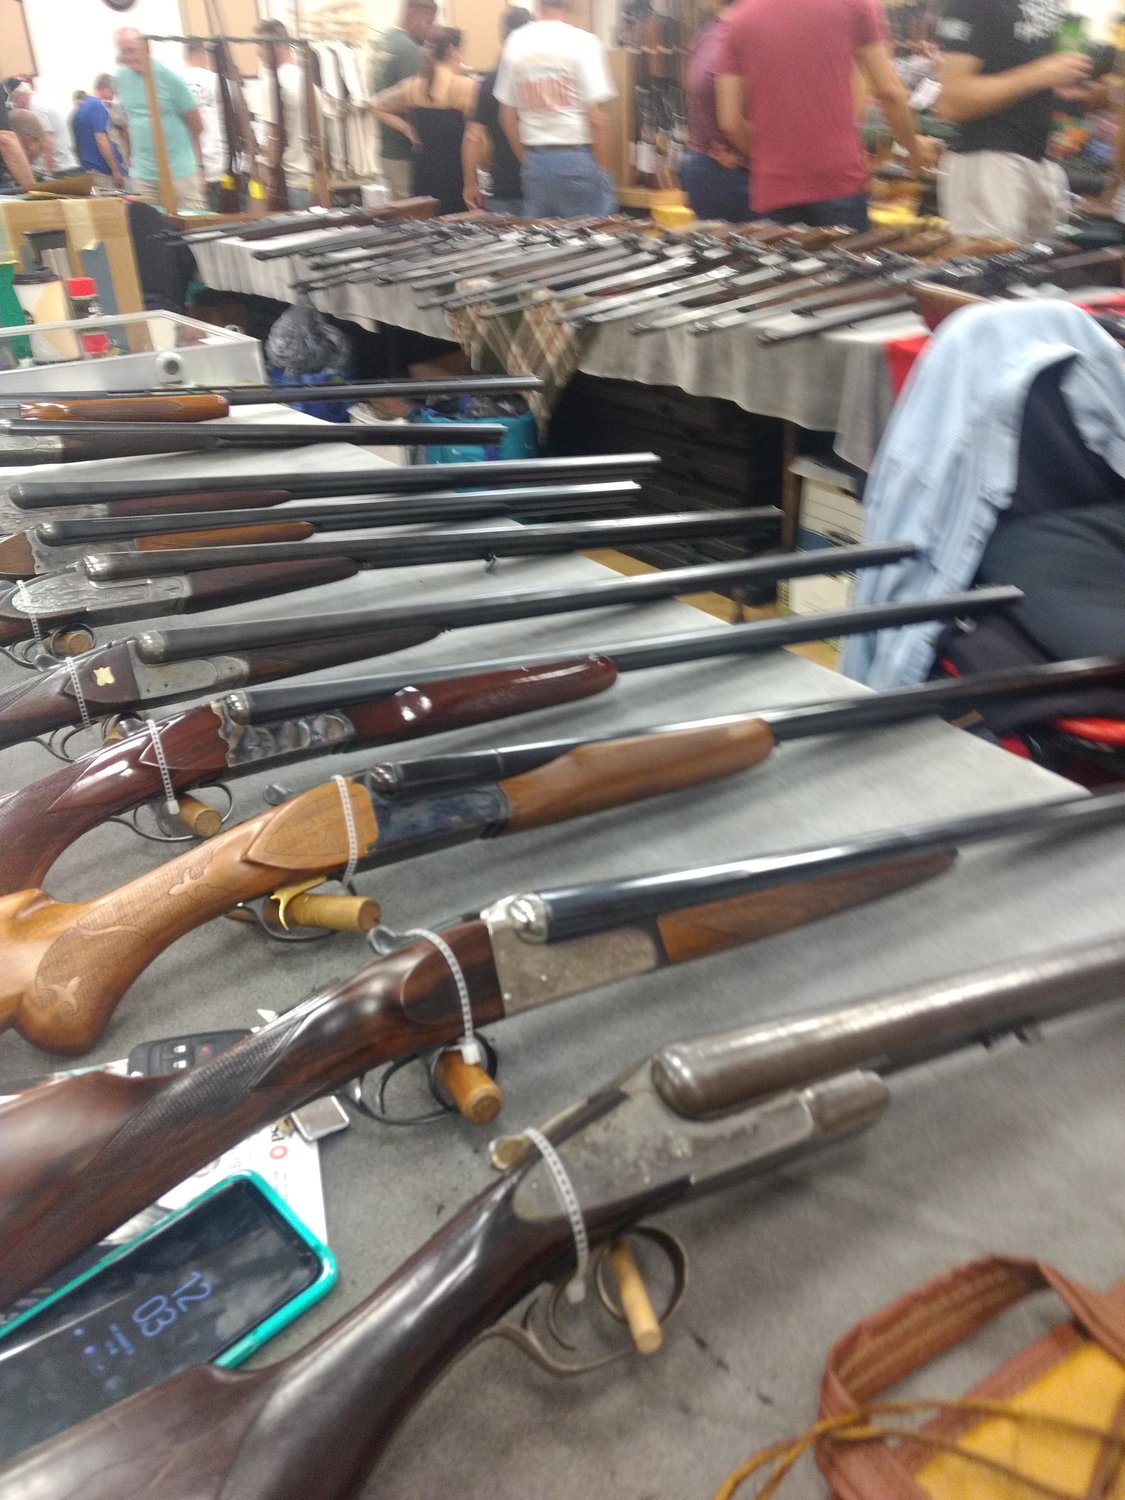 A variety of firearms were for sale and testing at a gun show at the Veterans of Foreign Wars hall in Centereach in August, organized by Martin Tretola, of Bellmore, owner of T&T Gunnery in Seaford.